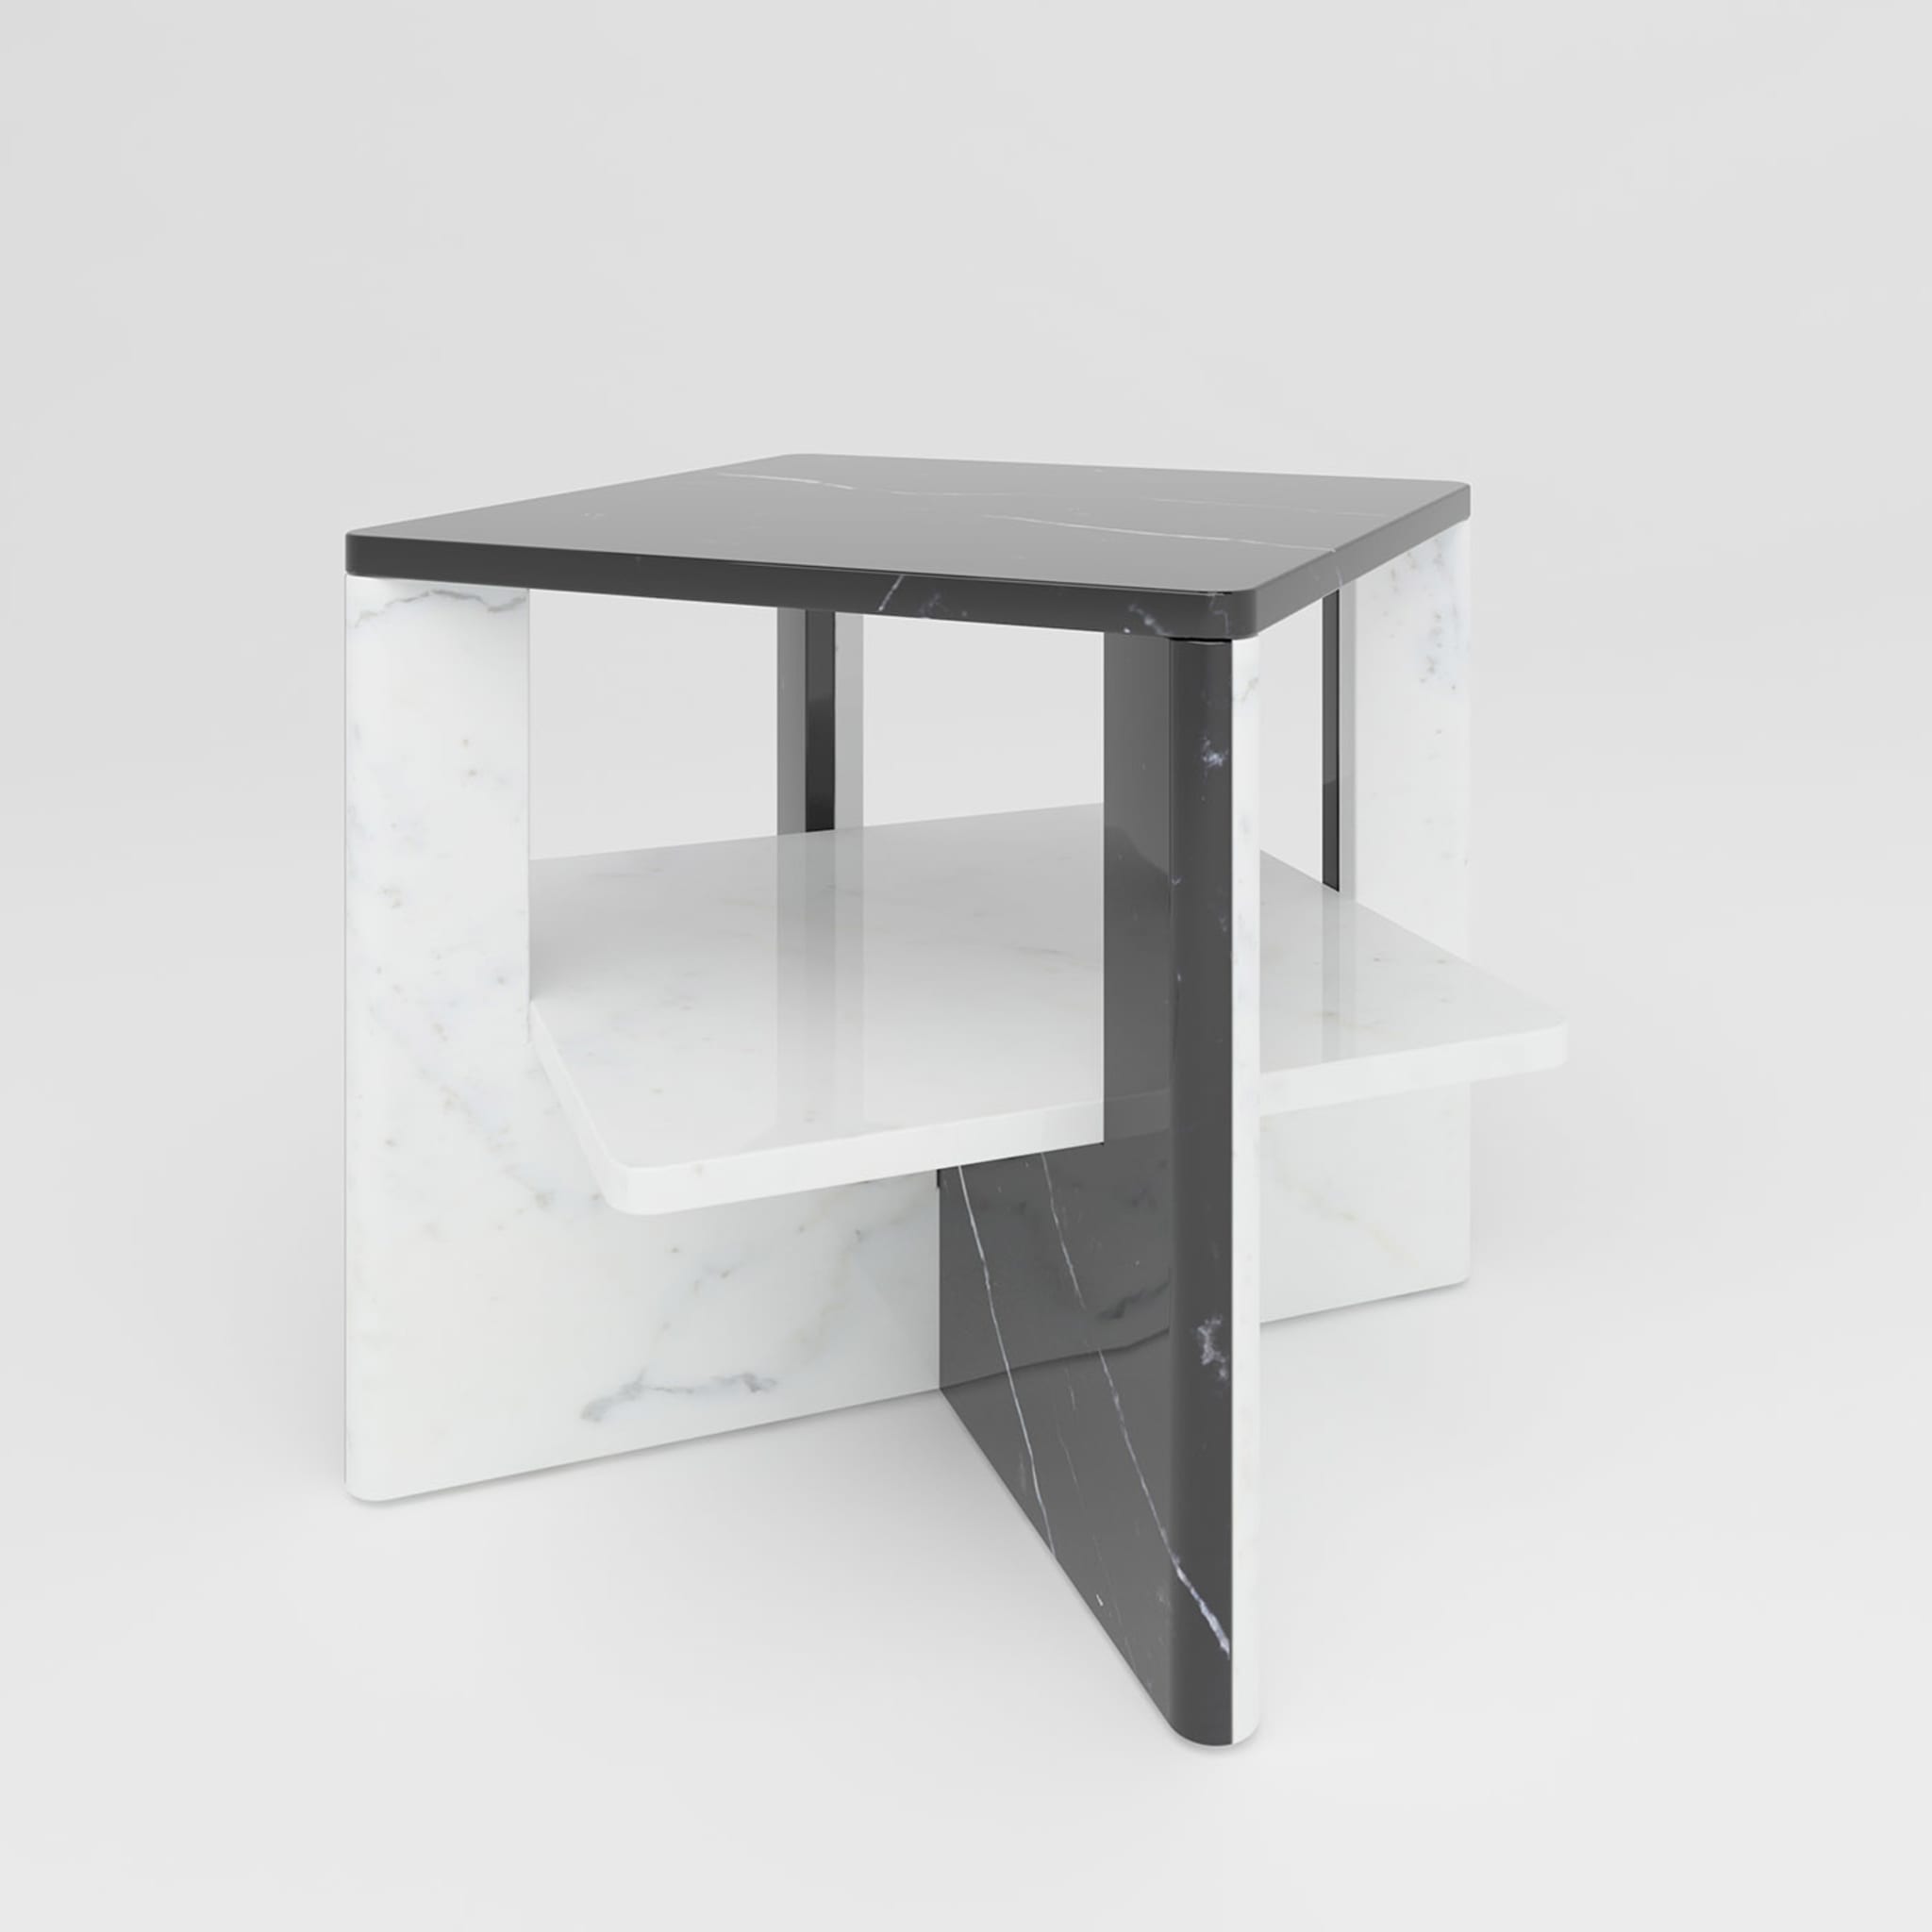 Plus+Double Marble Coffee Table #4 - Alternative view 1